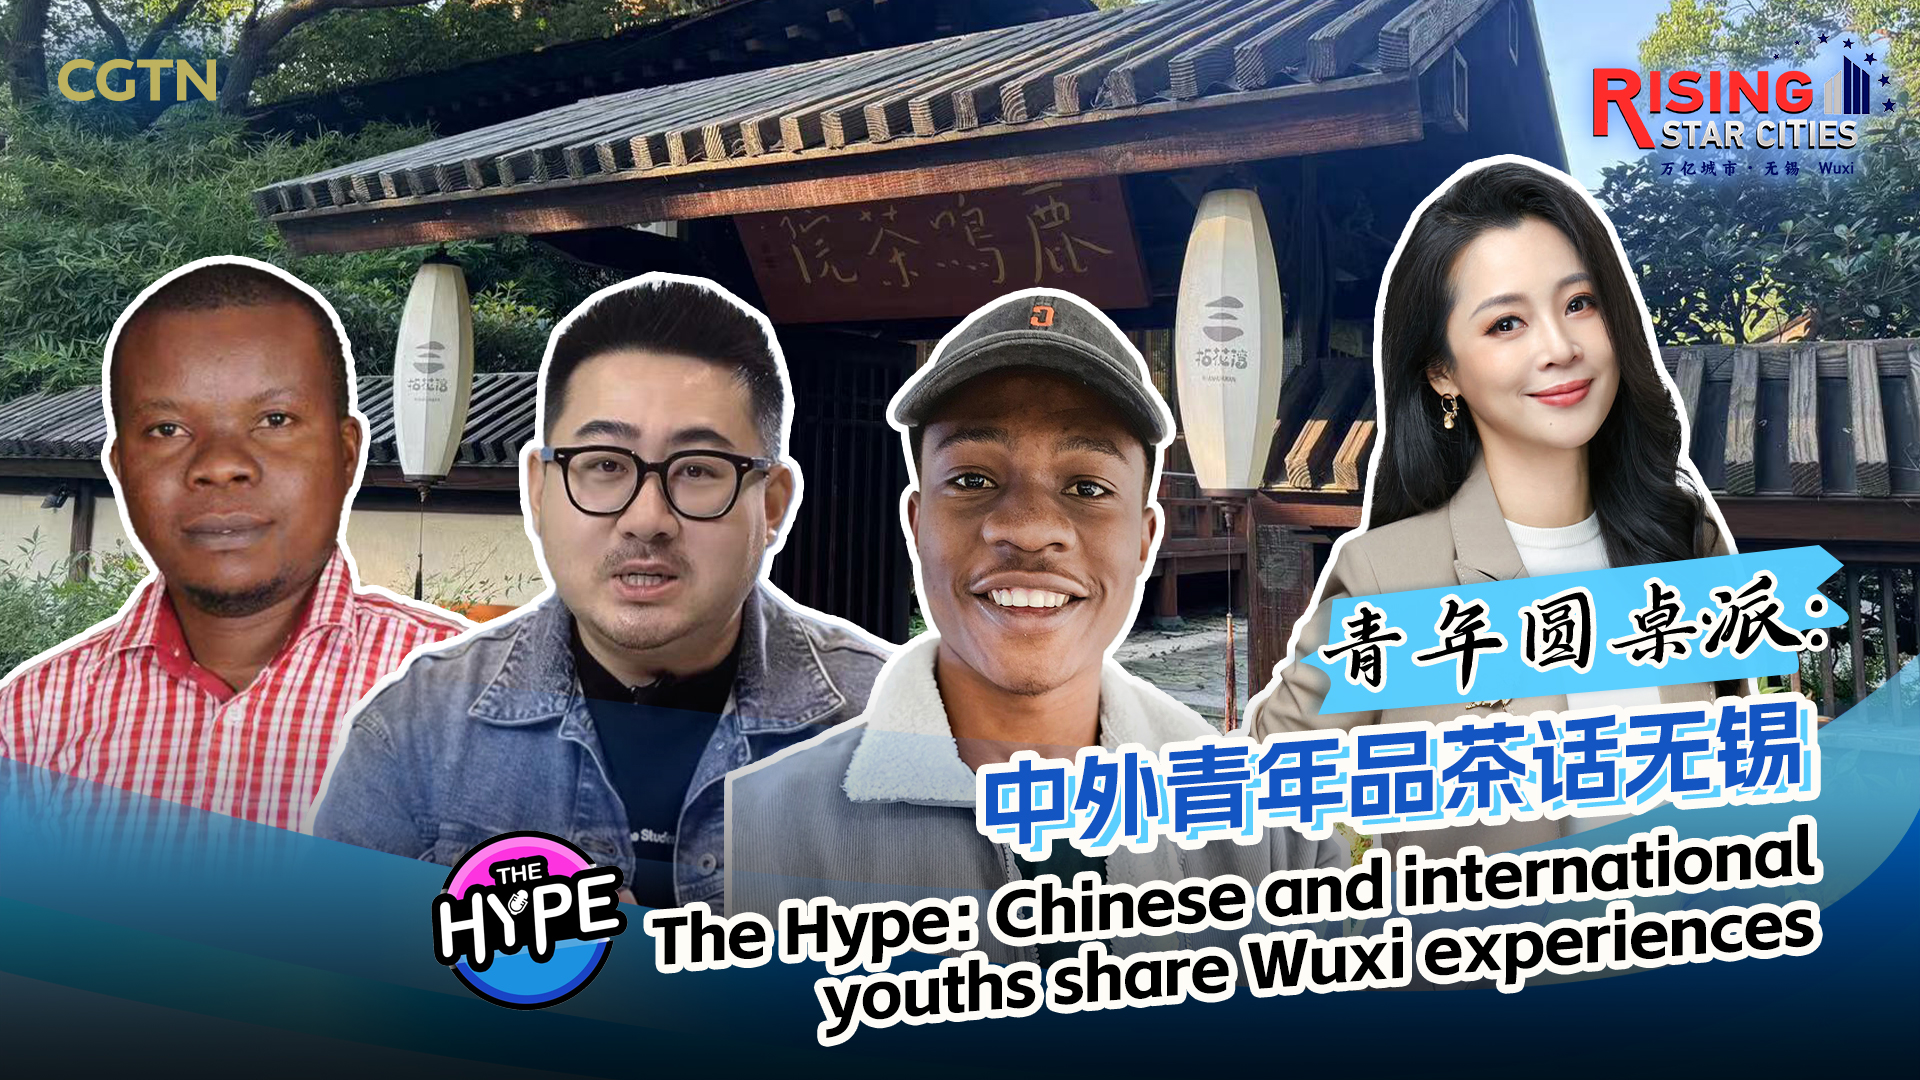 Live: The Hype – Chinese and international youths share Wuxi experiences